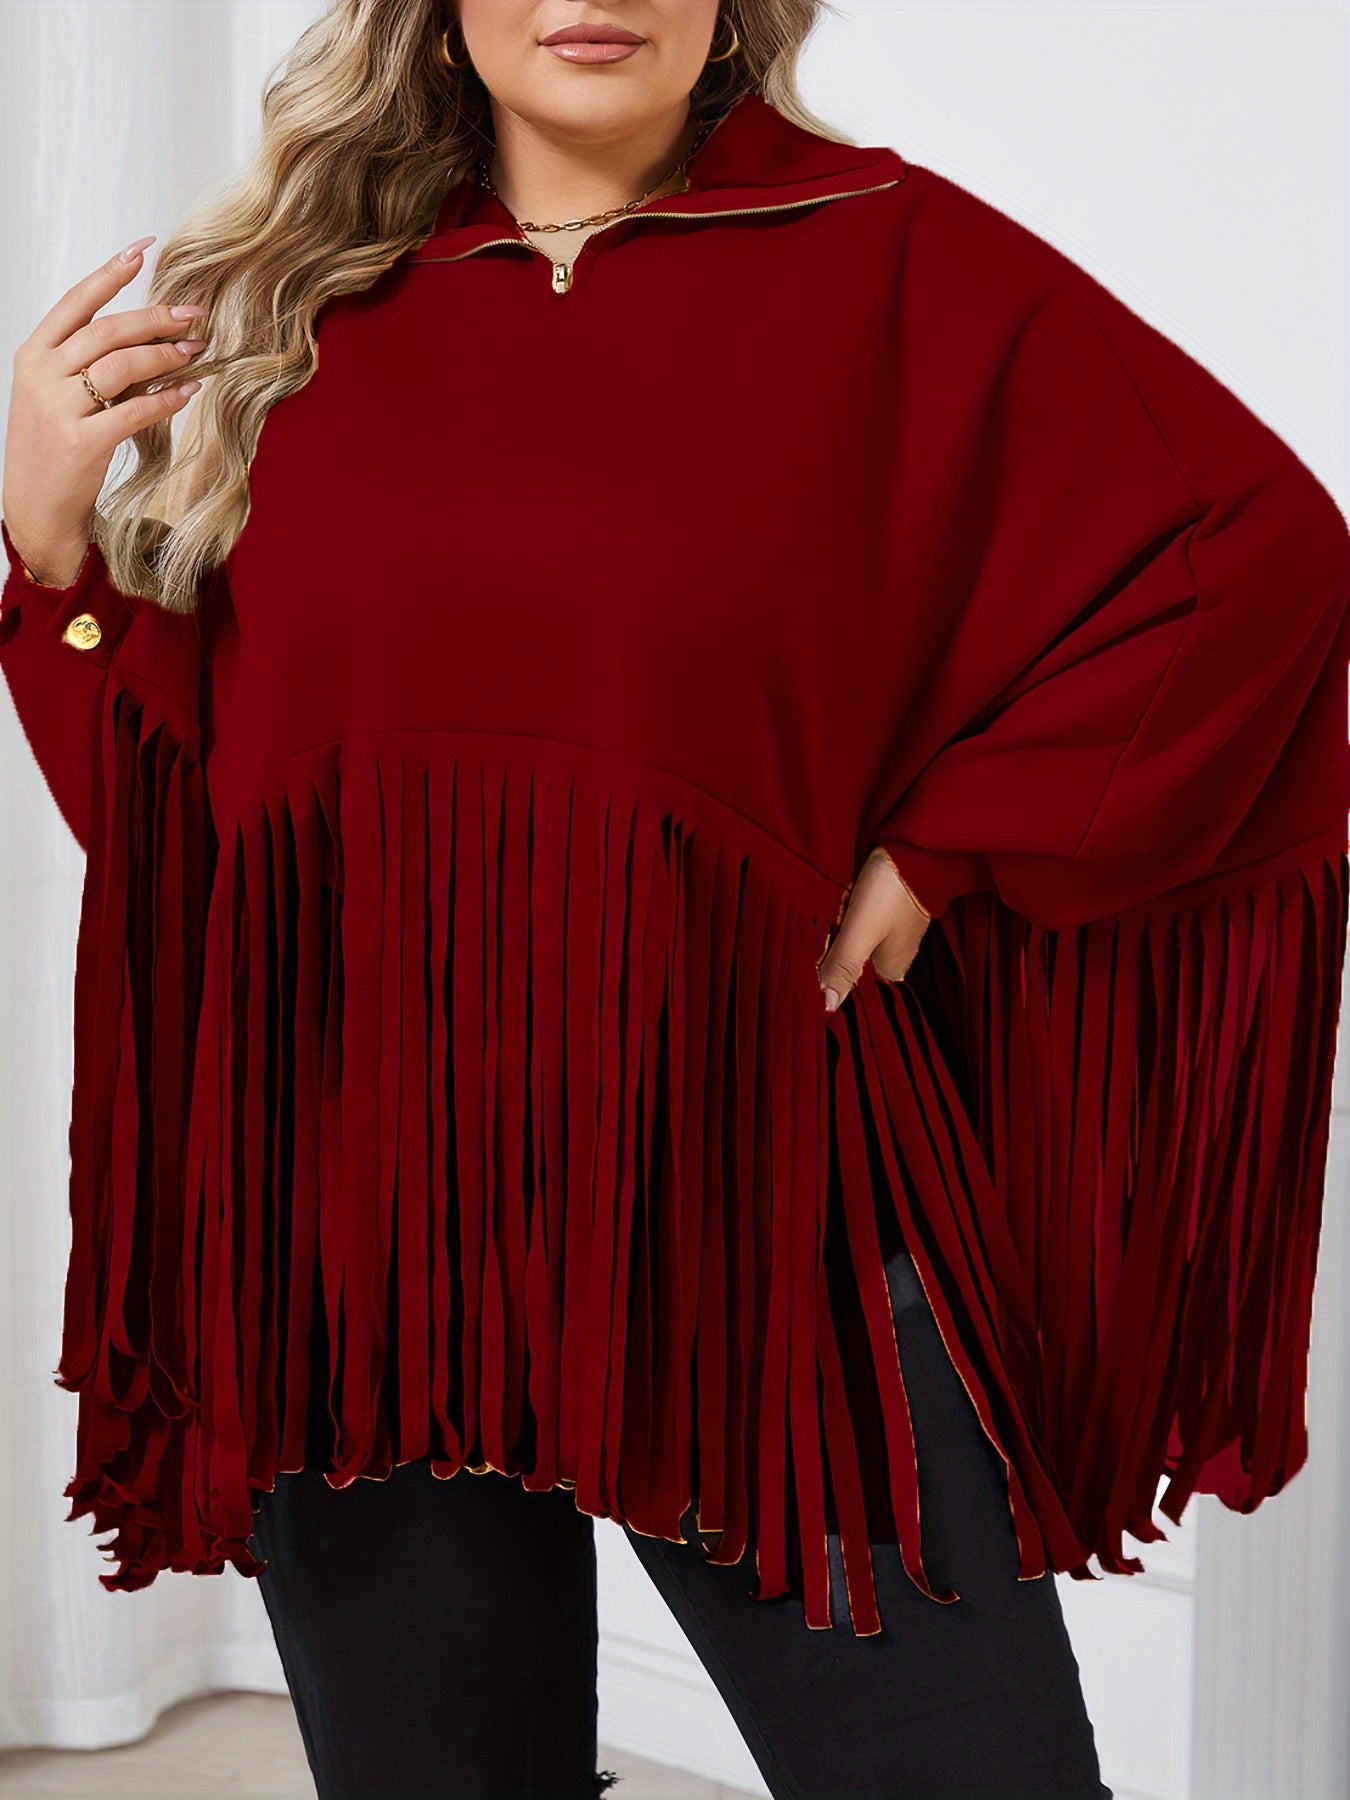 Person wearing a Maramalive™ Women's Plus Solid Batwing Sleeve Mock Neck Fringe Trim Cloak Top, standing indoors against a white background. Perfect for the Fall/Winter season.